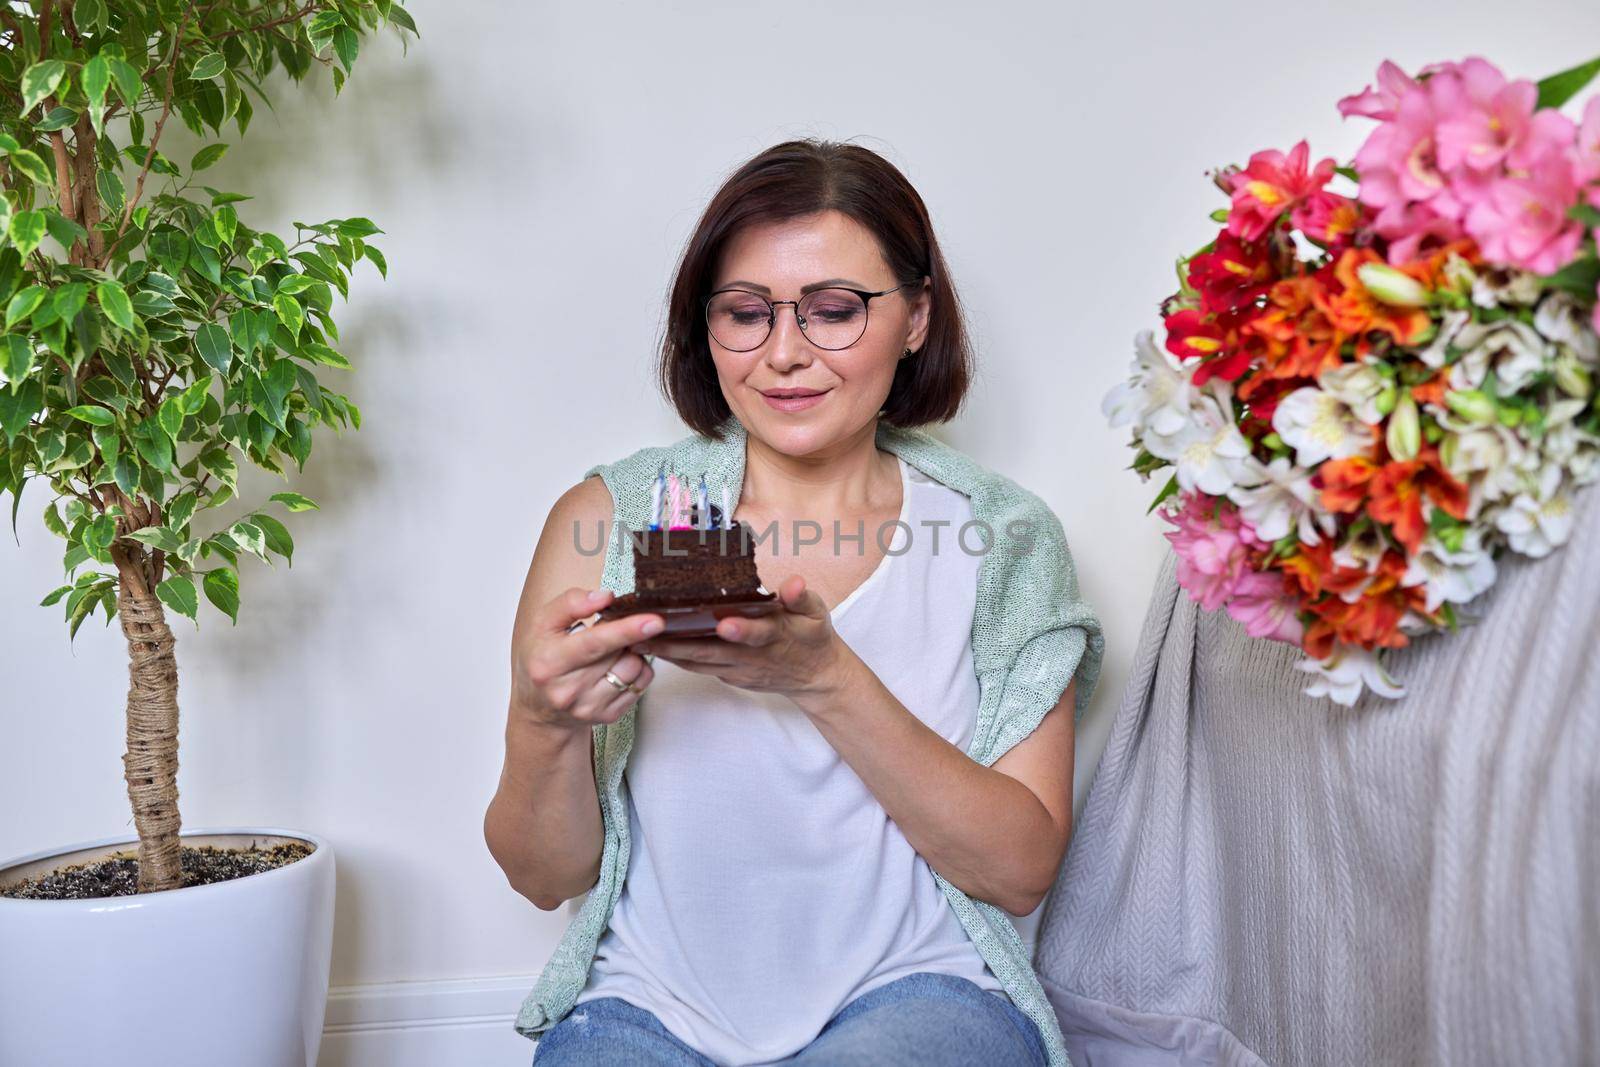 Middle-aged women with small birthday cake with candles. Happy female at home on the floor with bouquet of flowers. Age, date, aging, celebration, lifestyle, anniversary concept